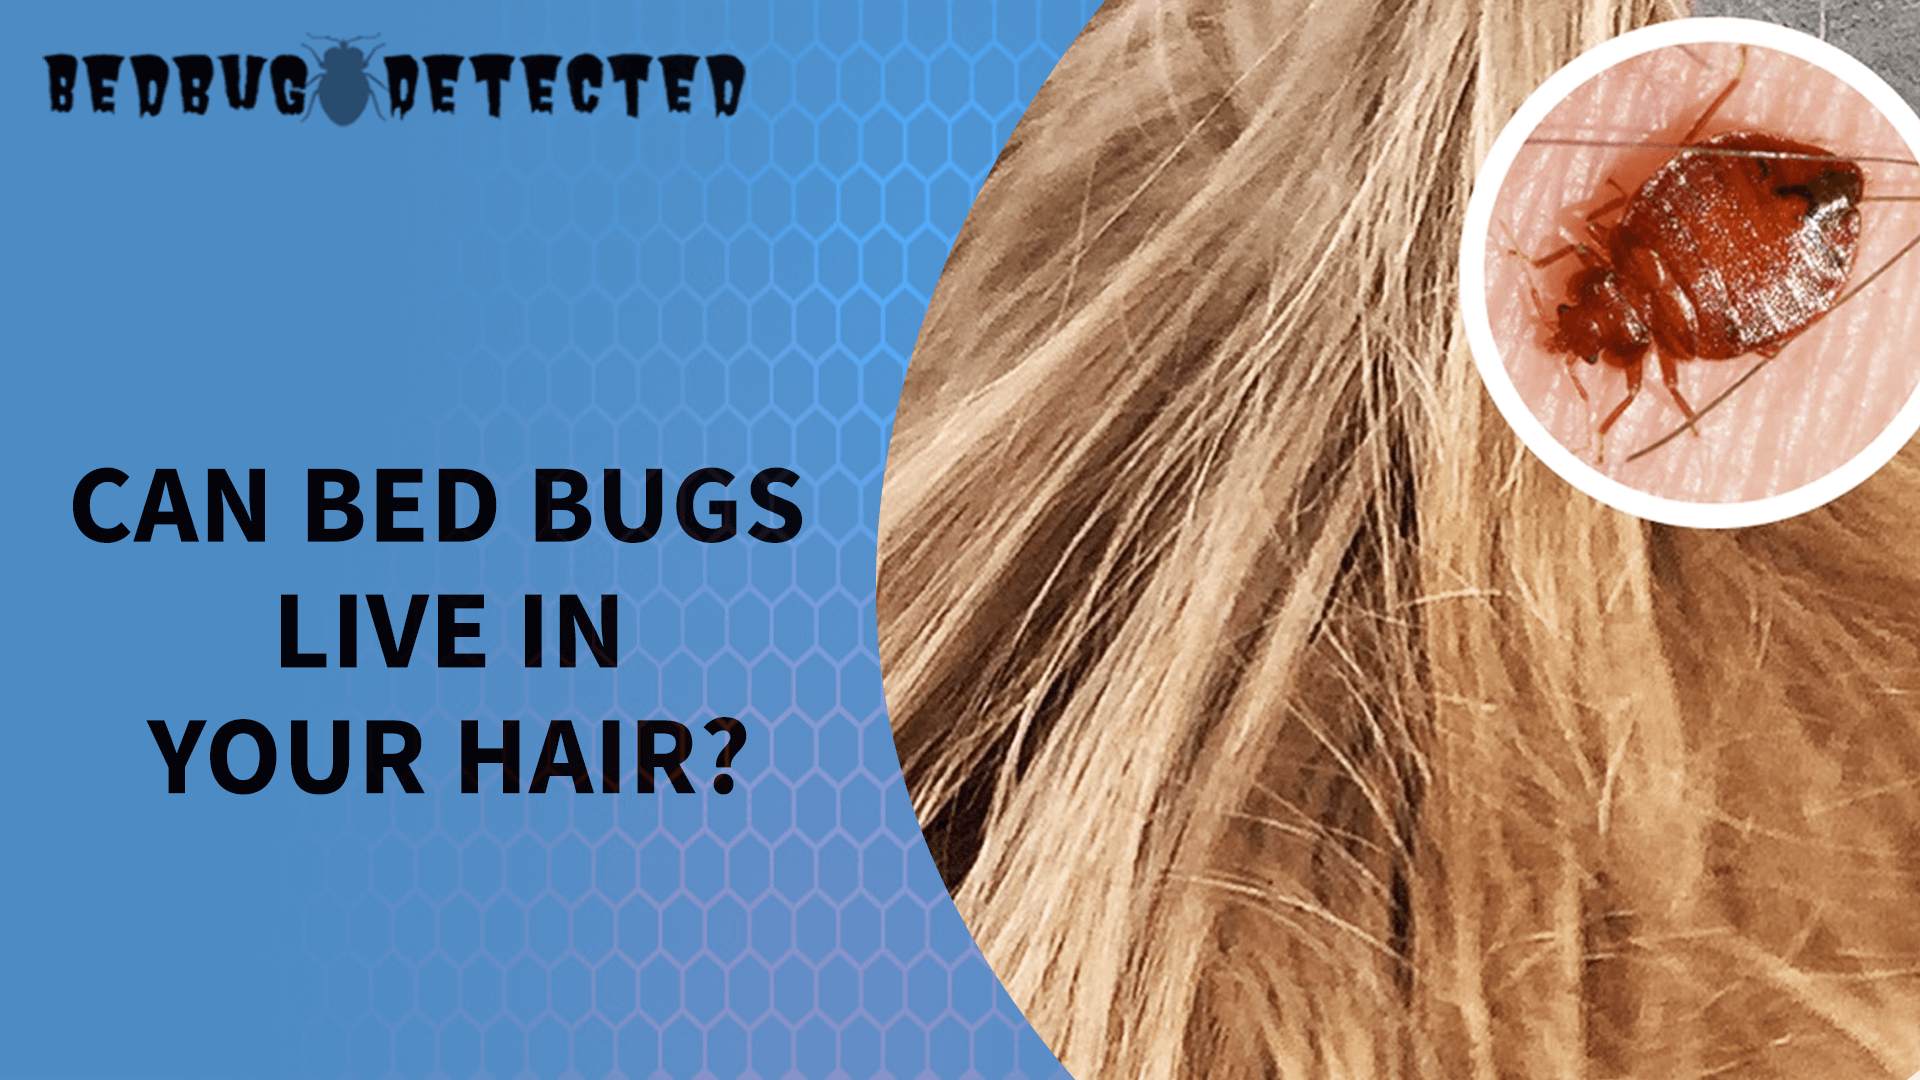 CAN BED BUGS LIVE IN YOUR HAIR (1)